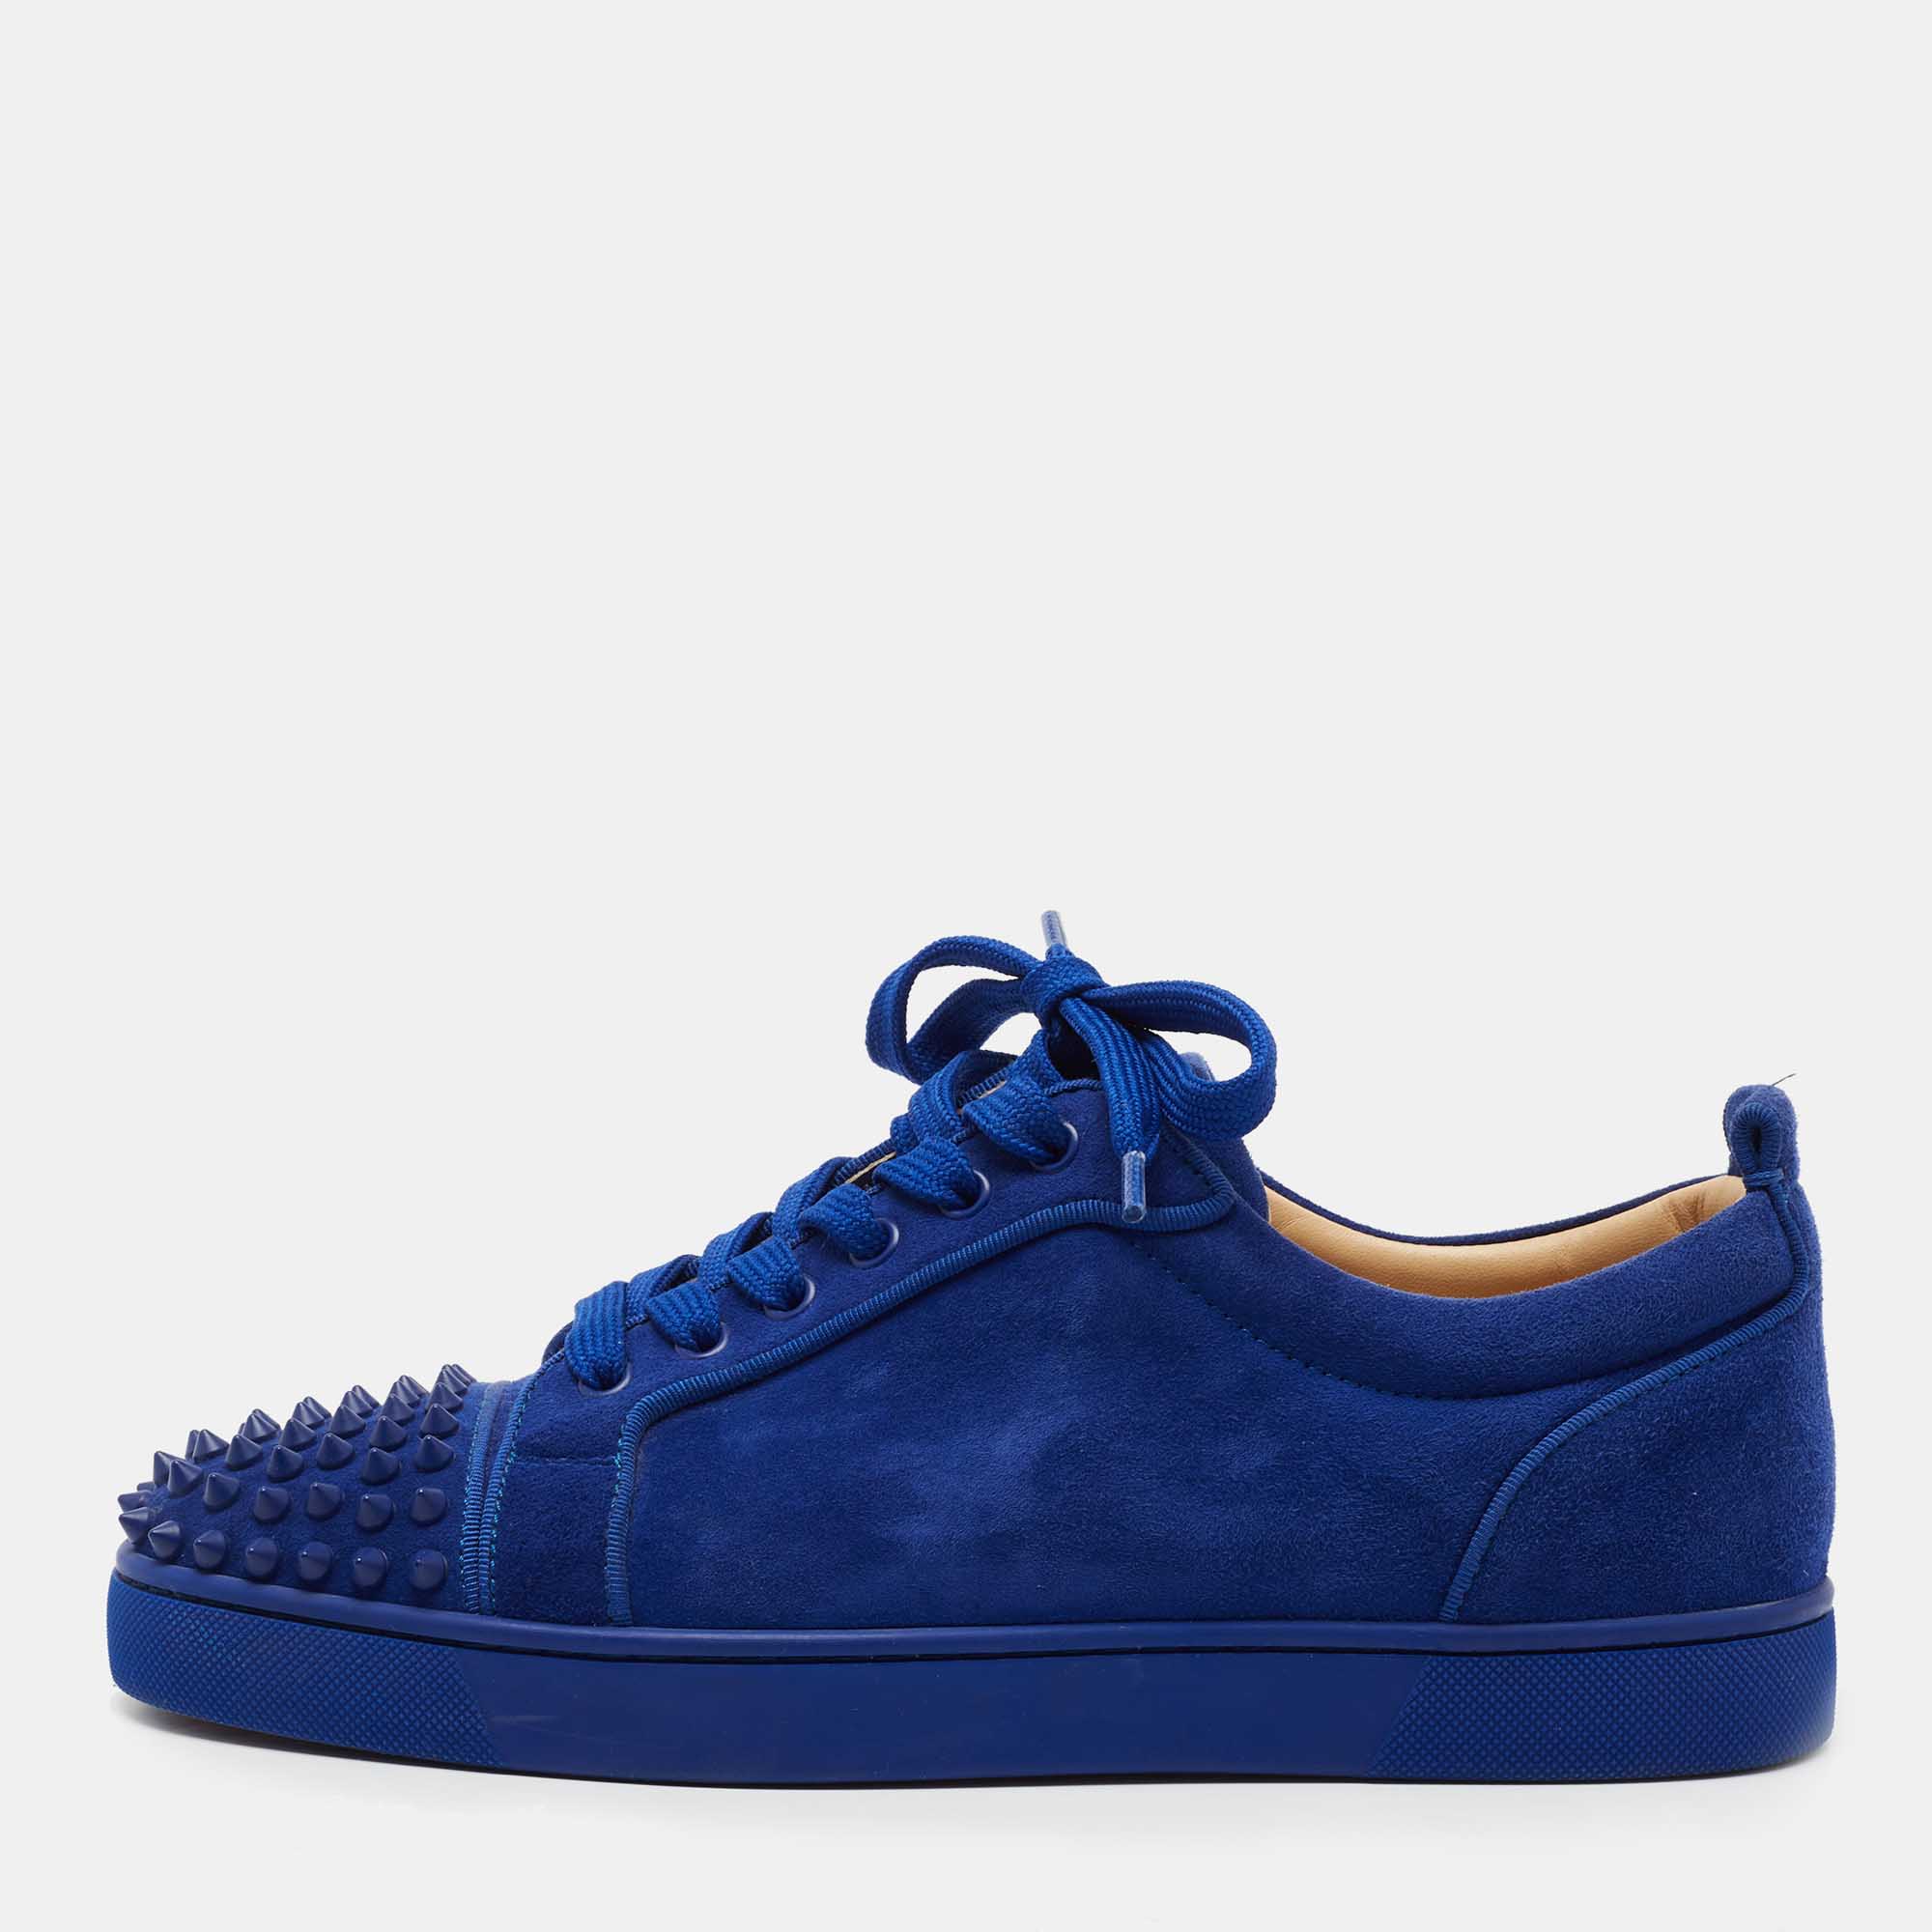 Pre-owned Christian Louboutin Blue Suede Louis Junior Spike Low Top Sneakers Size 40.5